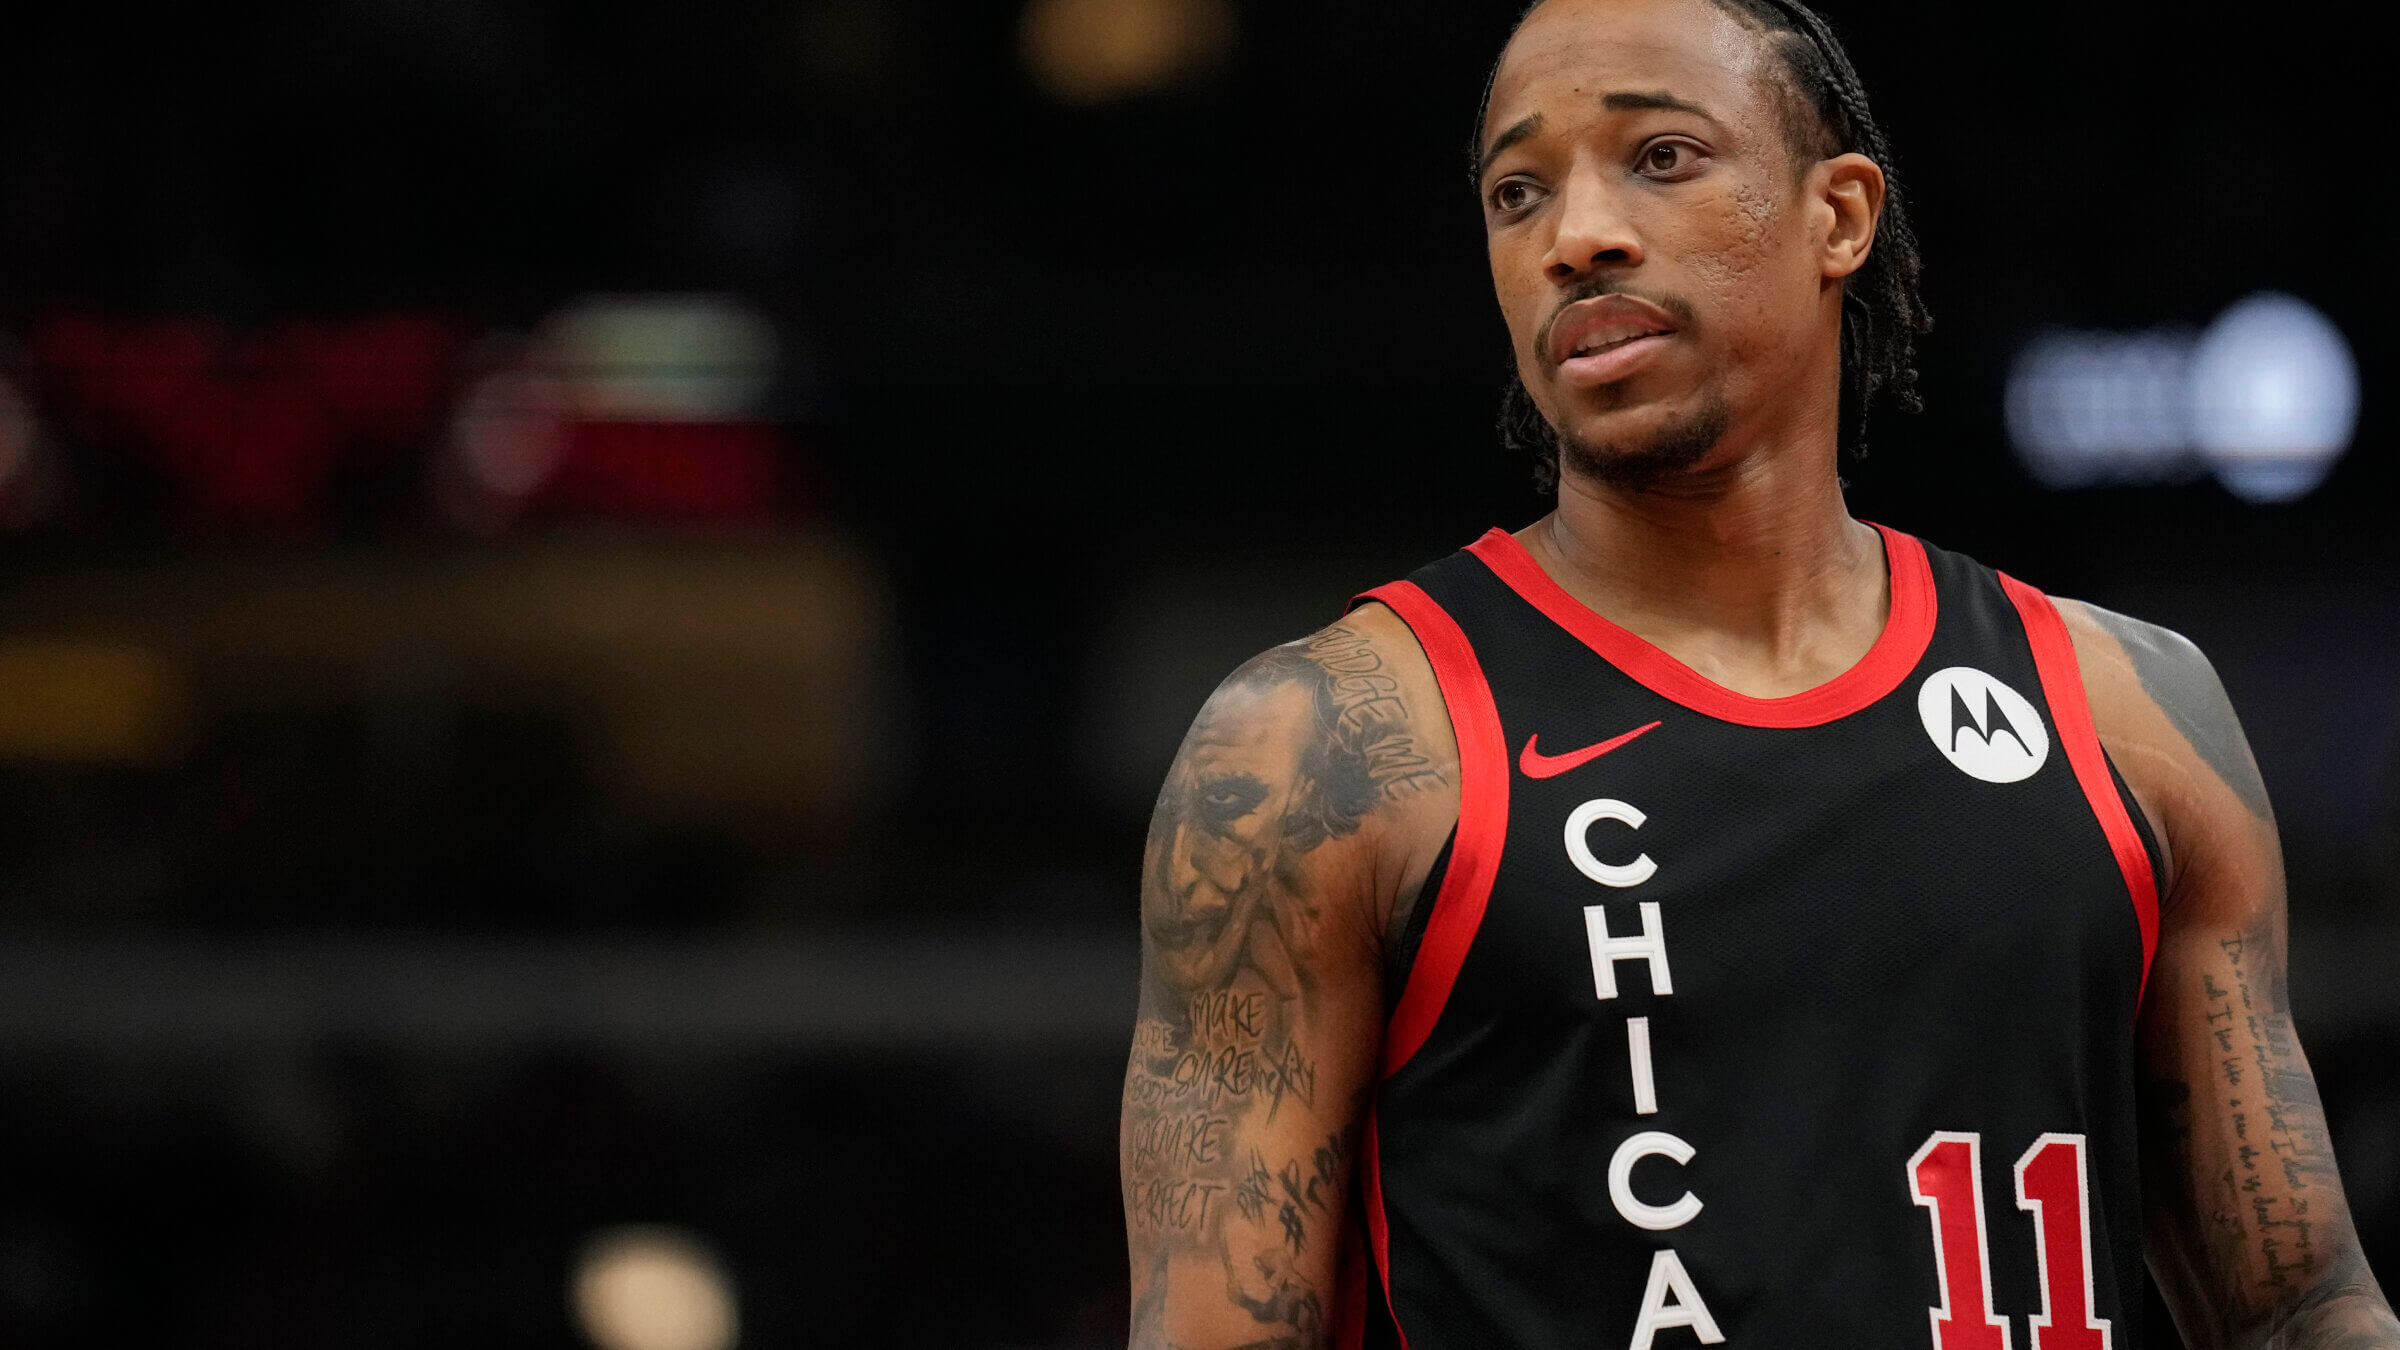 The Chicago Bulls' DeMar DeRozan disappointed pro-Palestinian NBA fans by accepting an award Thursday from the Simon Wiesenthal Center.